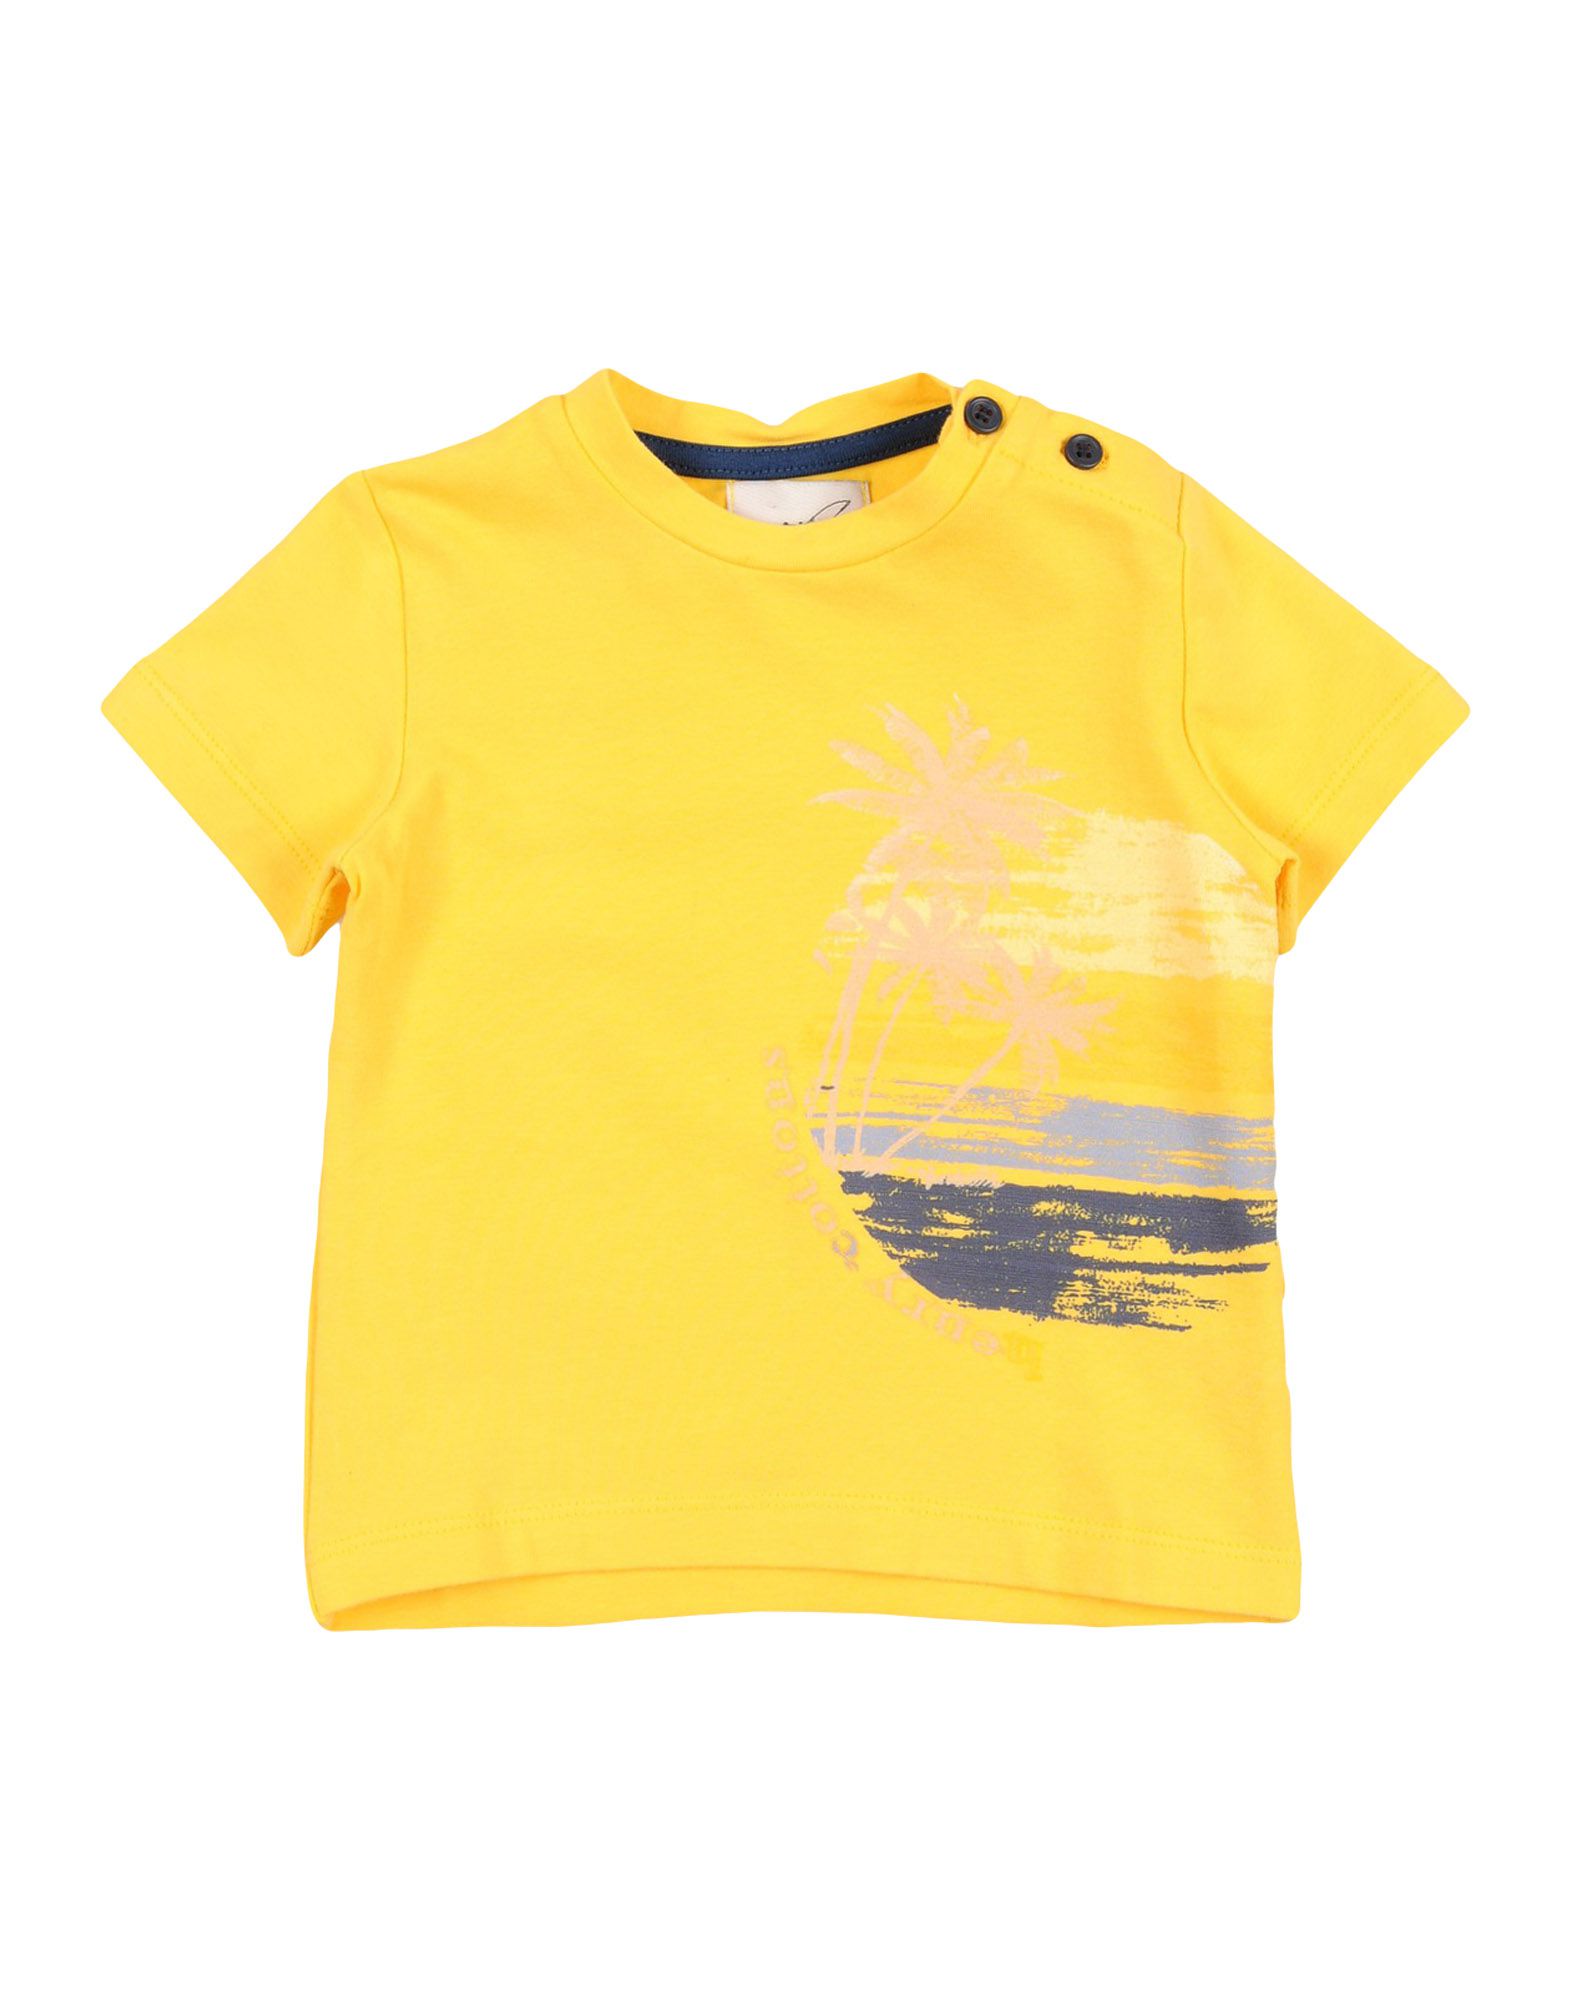 Henry Cotton's Kids' T-shirts In Yellow